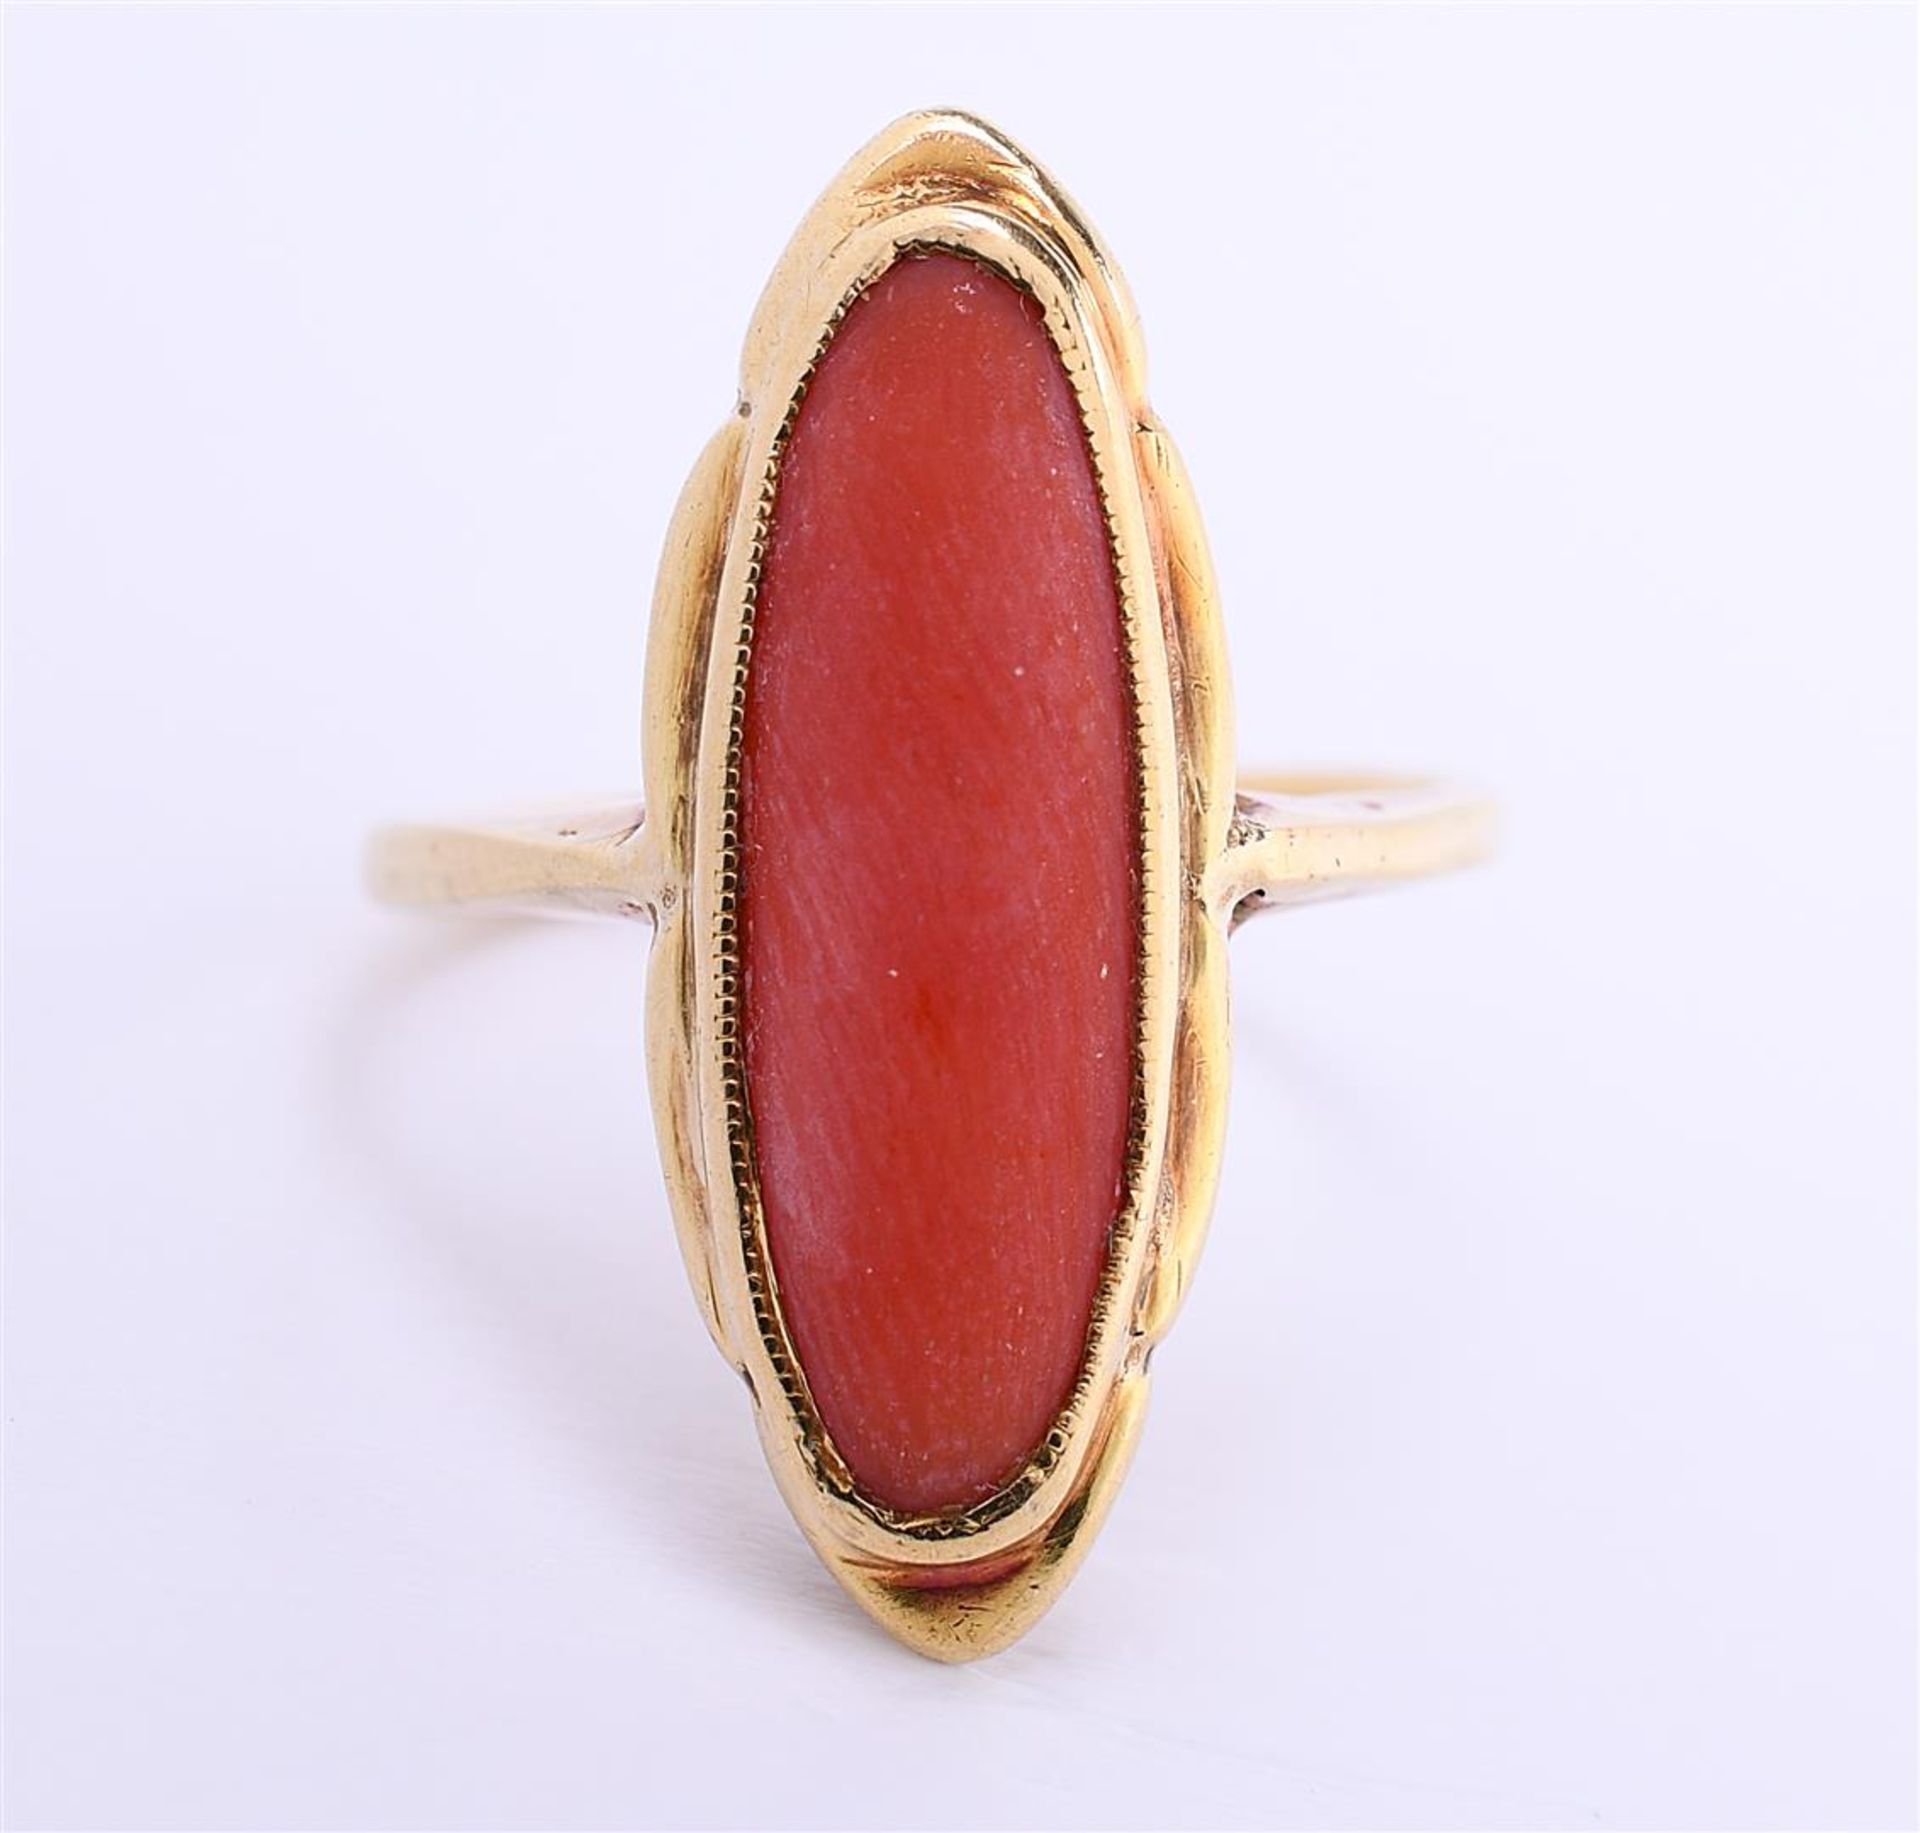 14 kt yellow gold scalloping set with marquise cut red coral. Ring size 50 / 16 mm